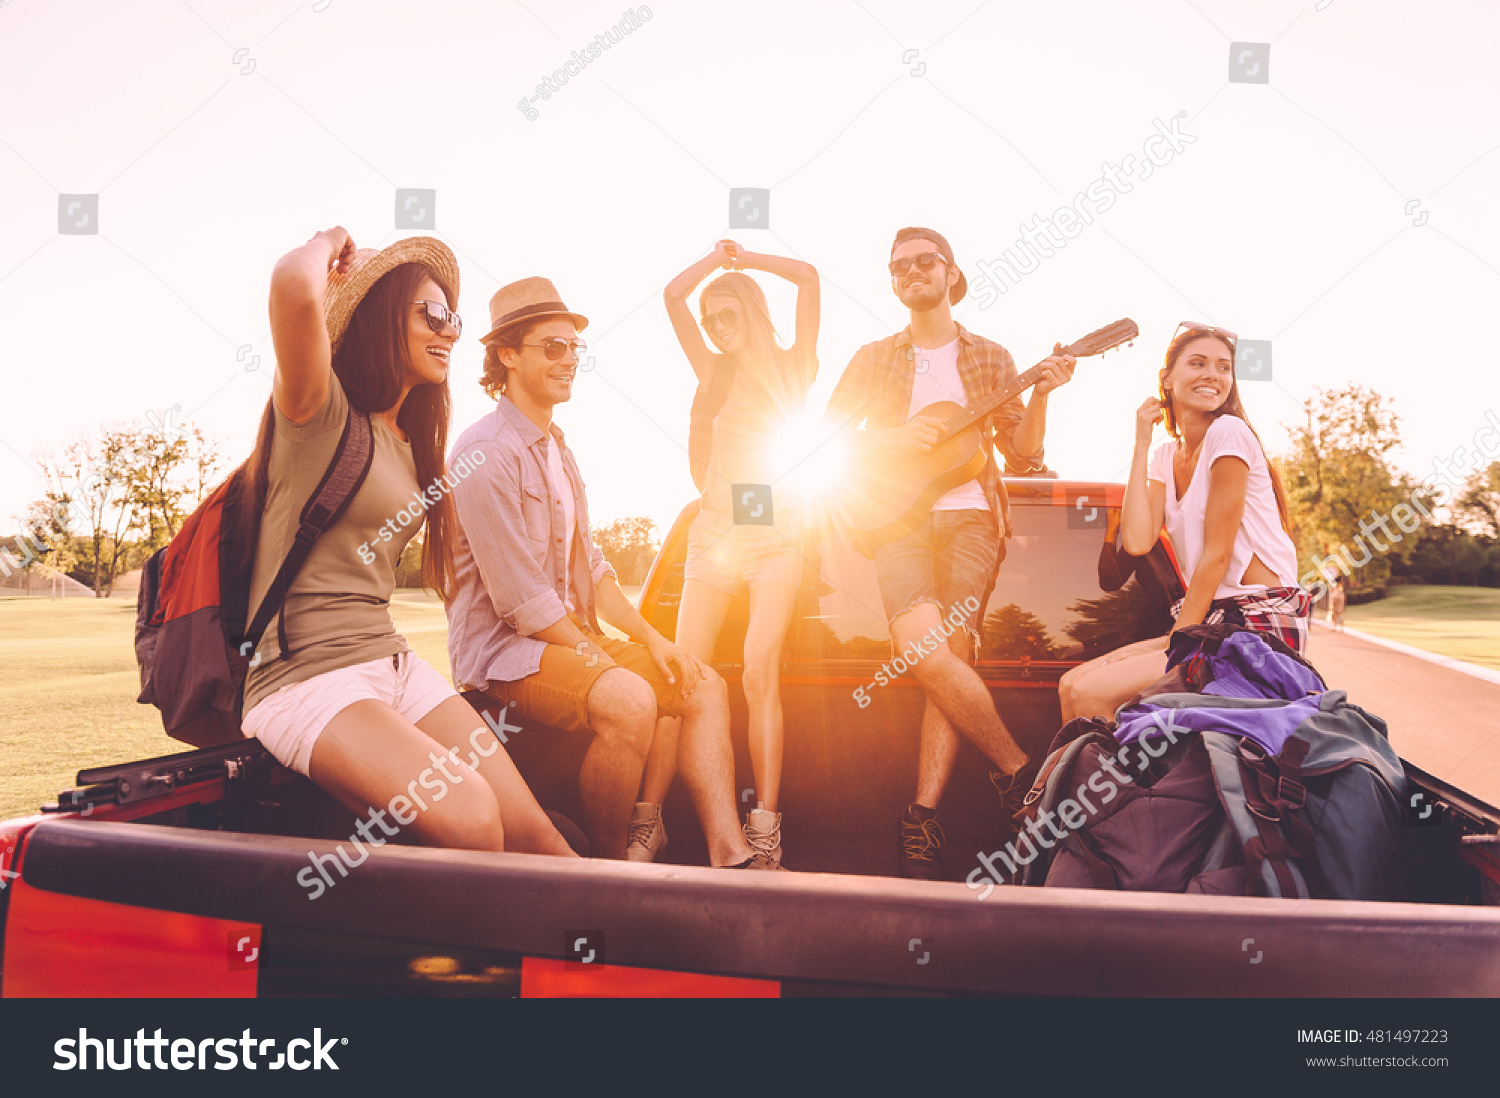 Enjoying the best road trip ever. Group of young cheerful people enjoying their road trip while sitting in pick-up truck together  #481497223